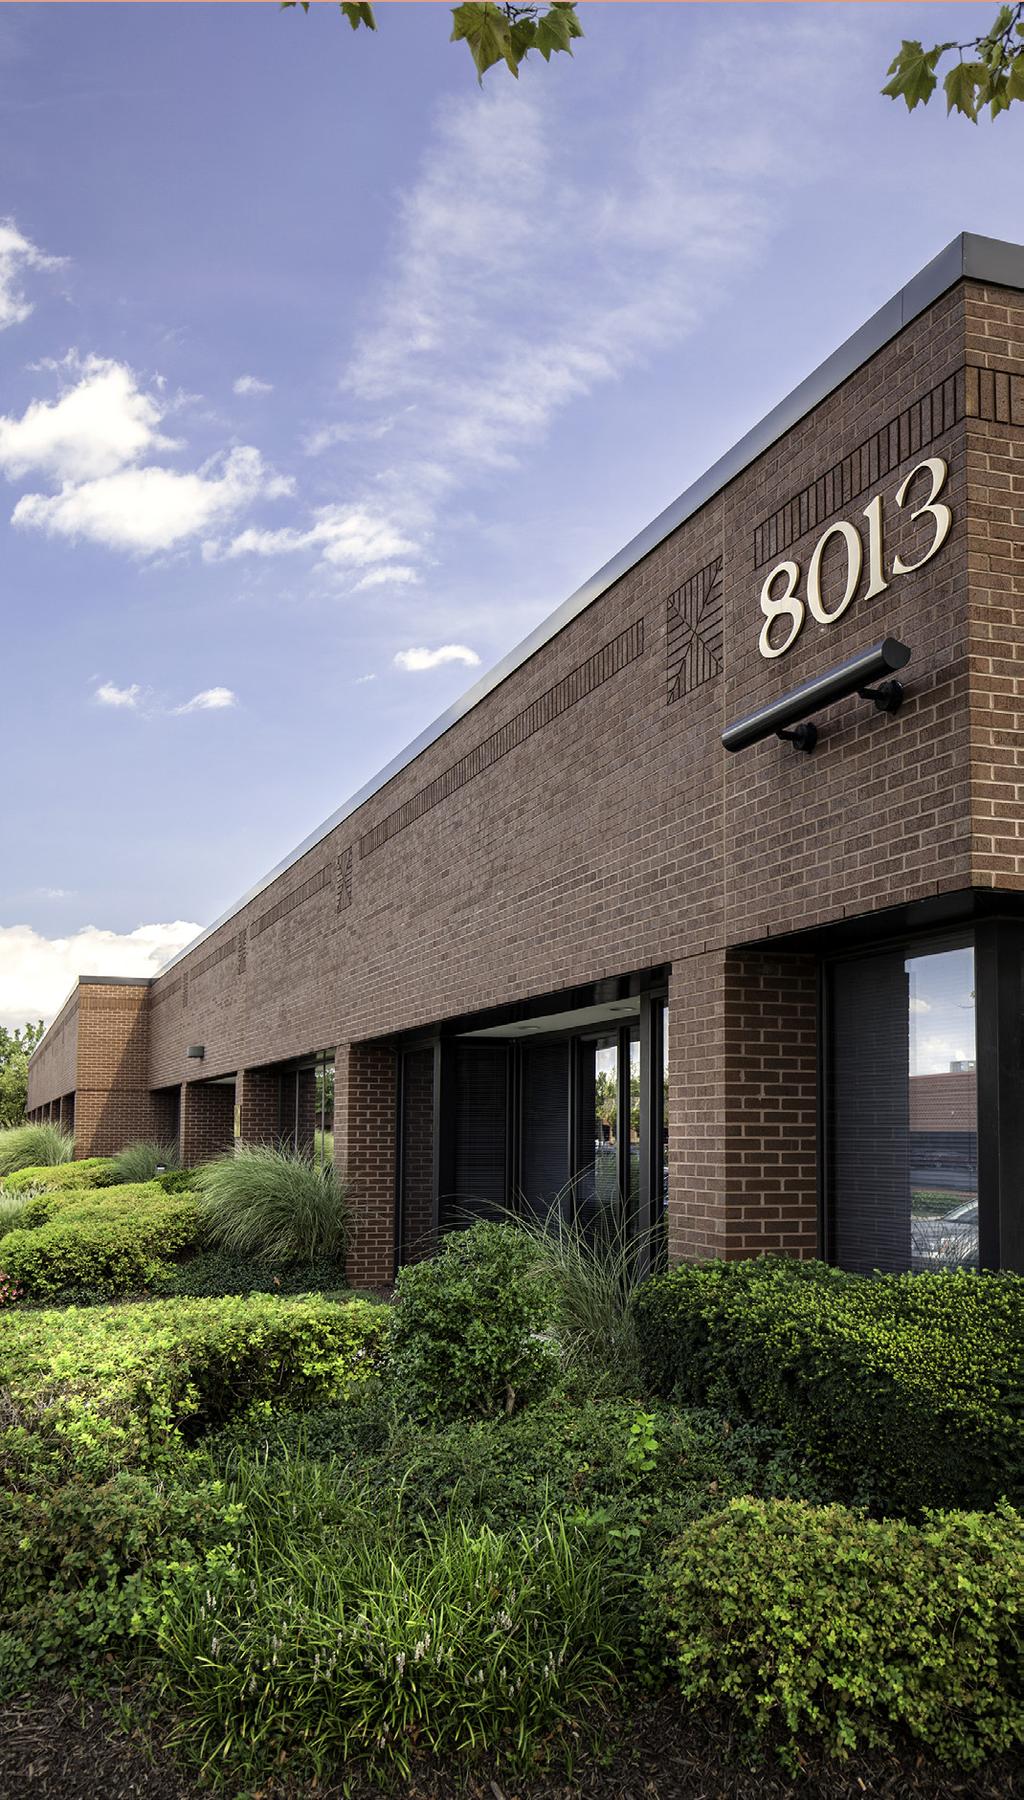 Property Information available 8007 Corporate: Unit H - 6,227 sf 8013 Corporate: 100% leased 8015 Corporate: 100%